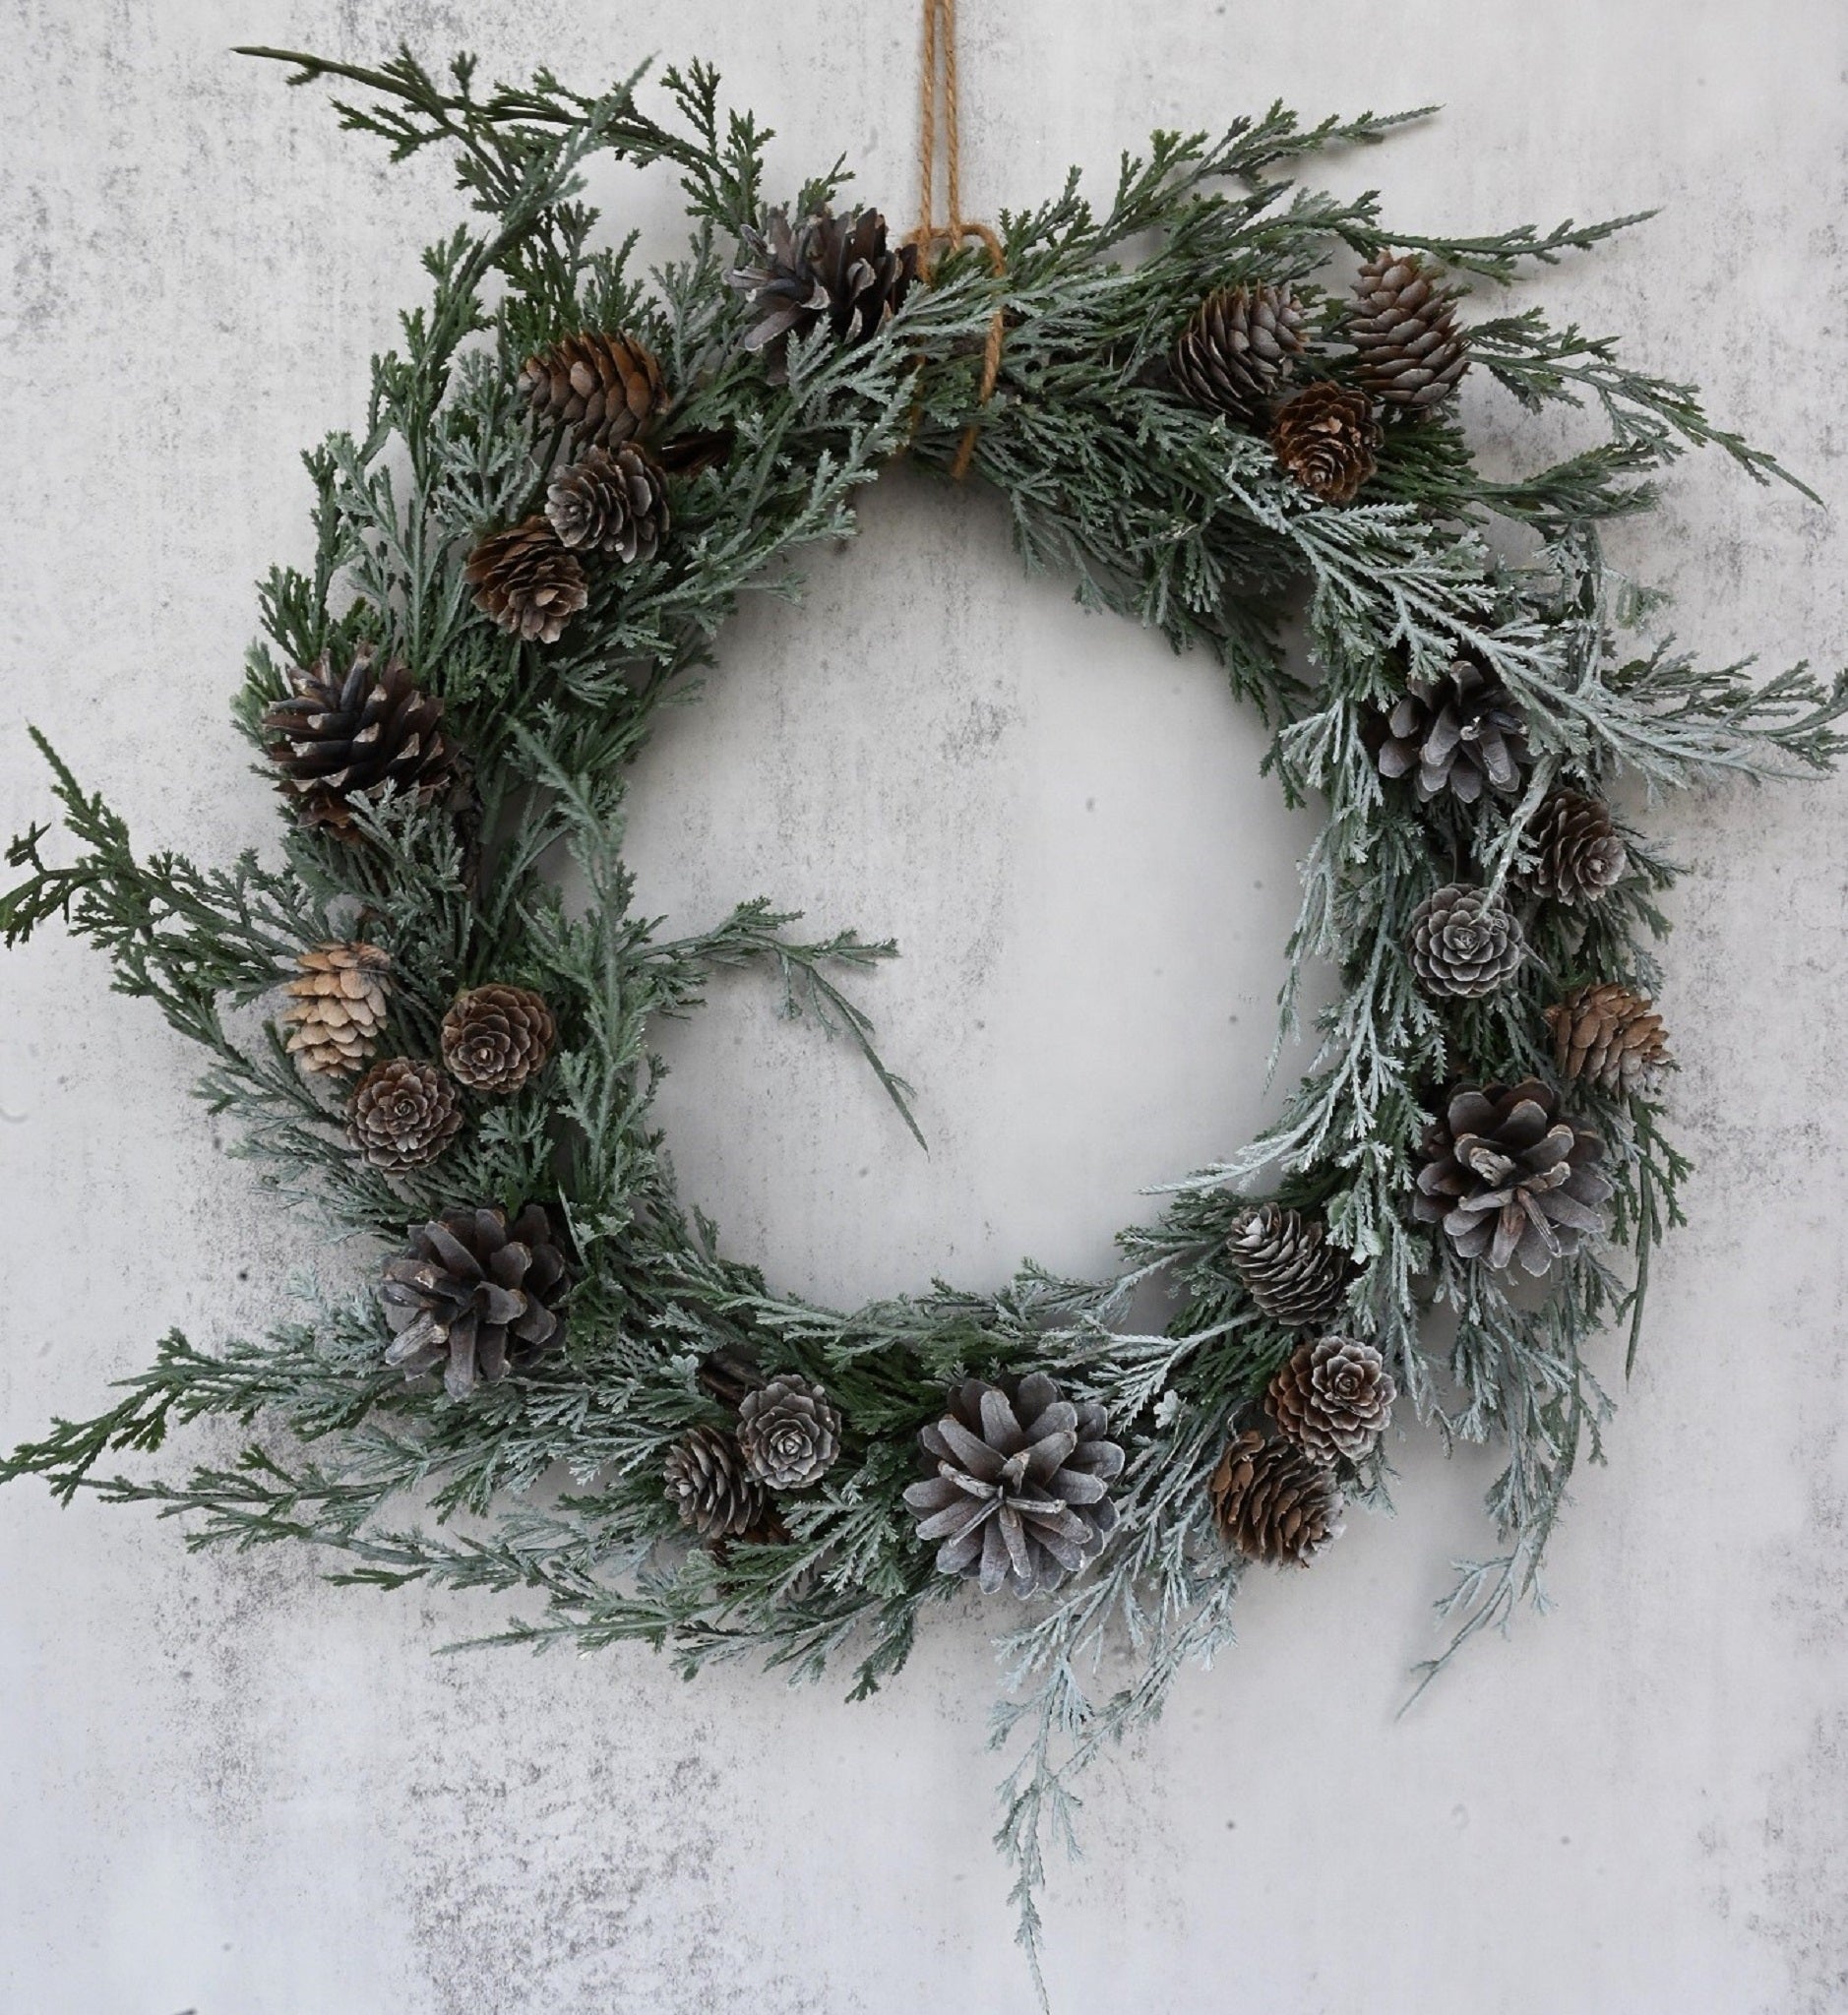 Frosted Wintergreen Wreath